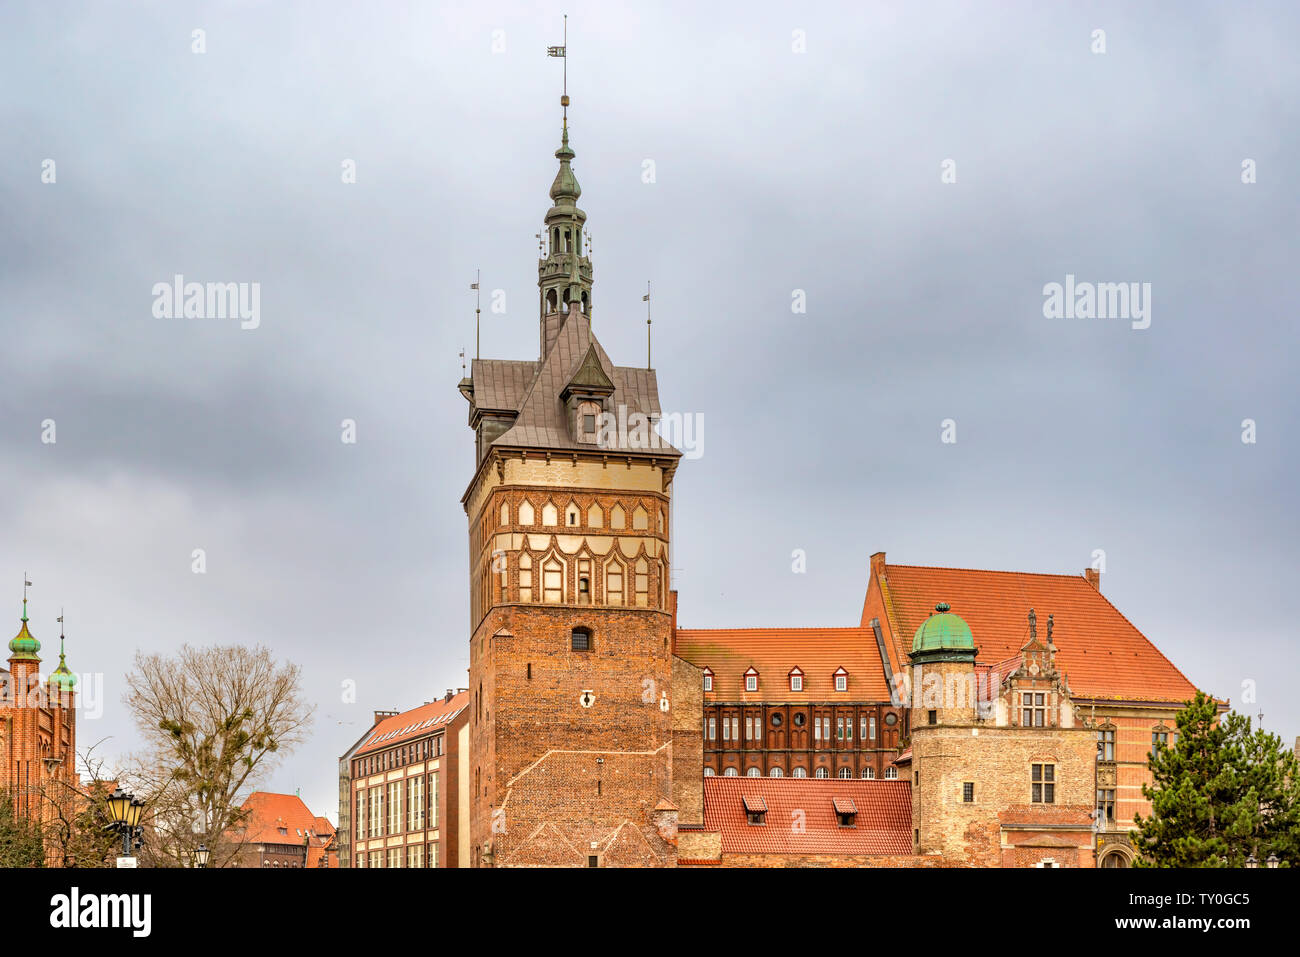 View at the Prison tower and the torture house now housing amber museum located in the old town of Gdansk, Poland Stock Photo